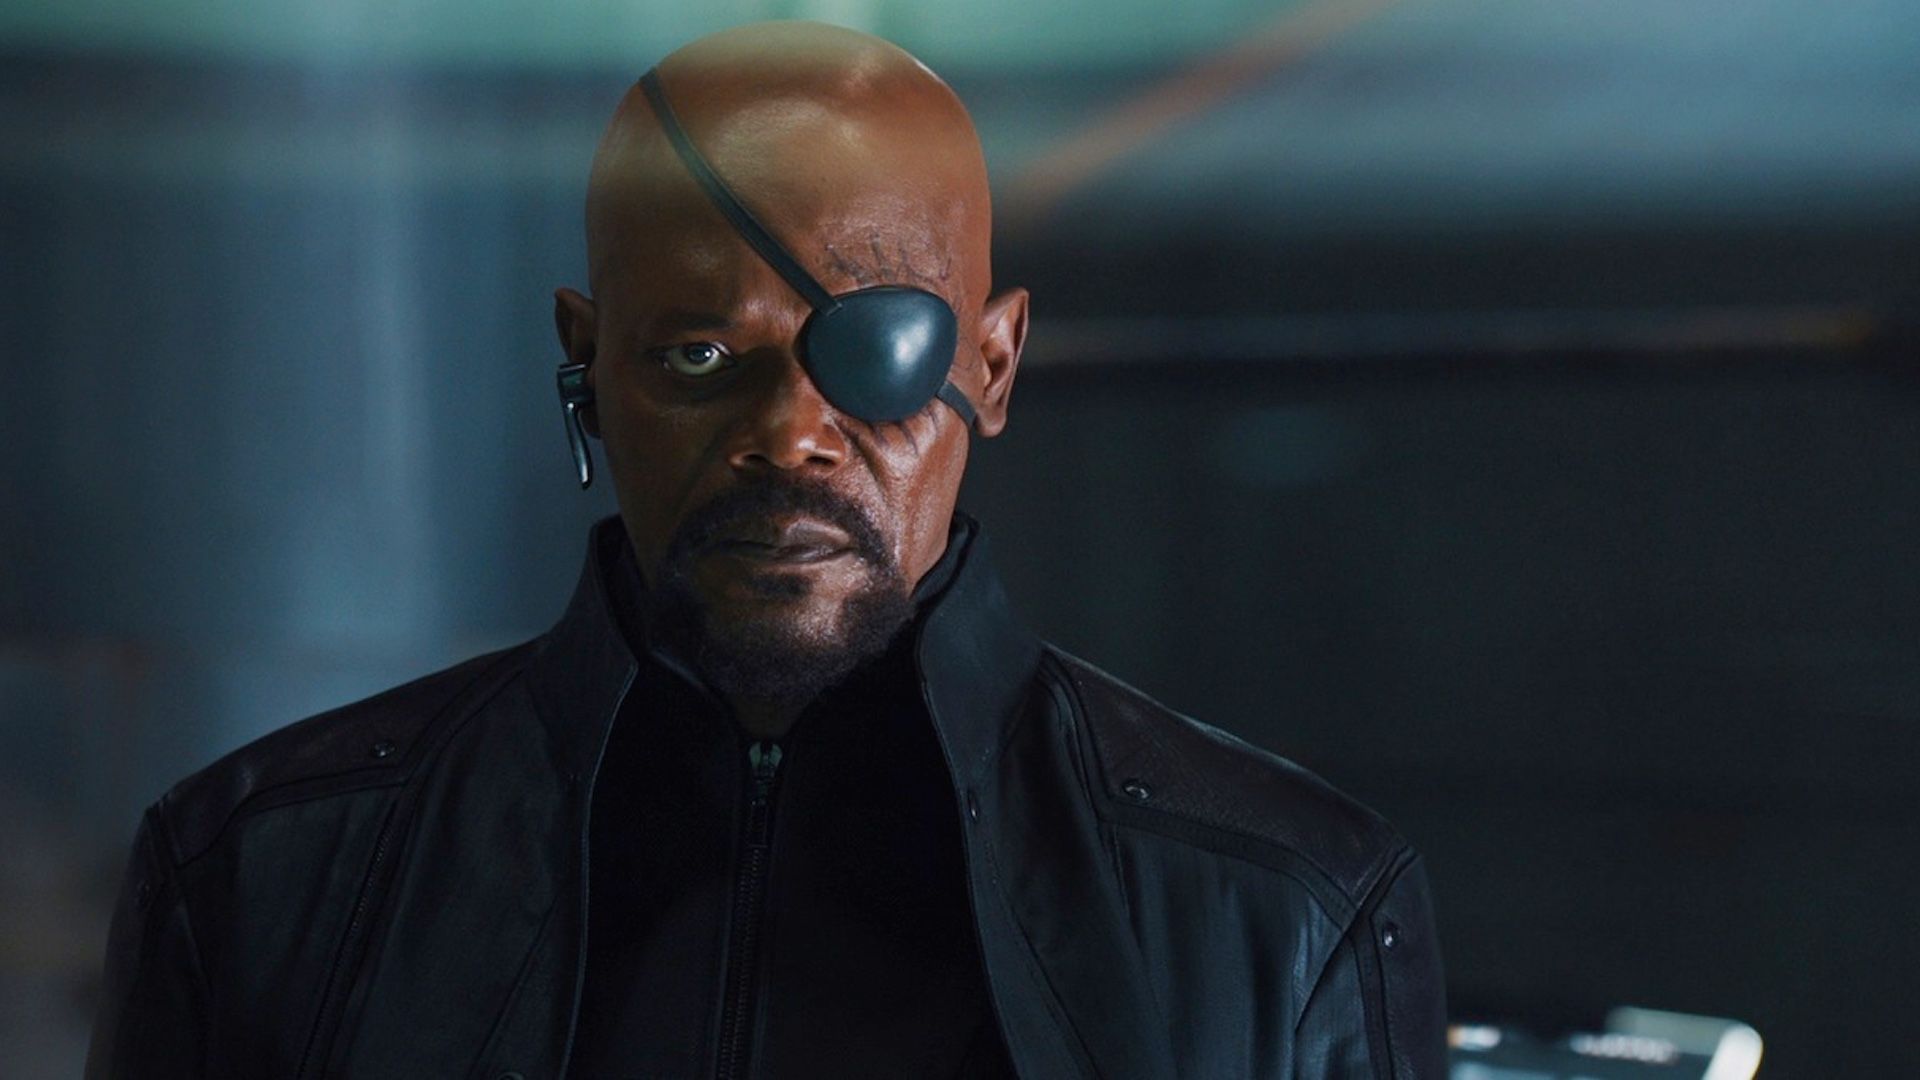 Samuel L Jackson’s 10 Most Badass Characters Ranked by Badassery